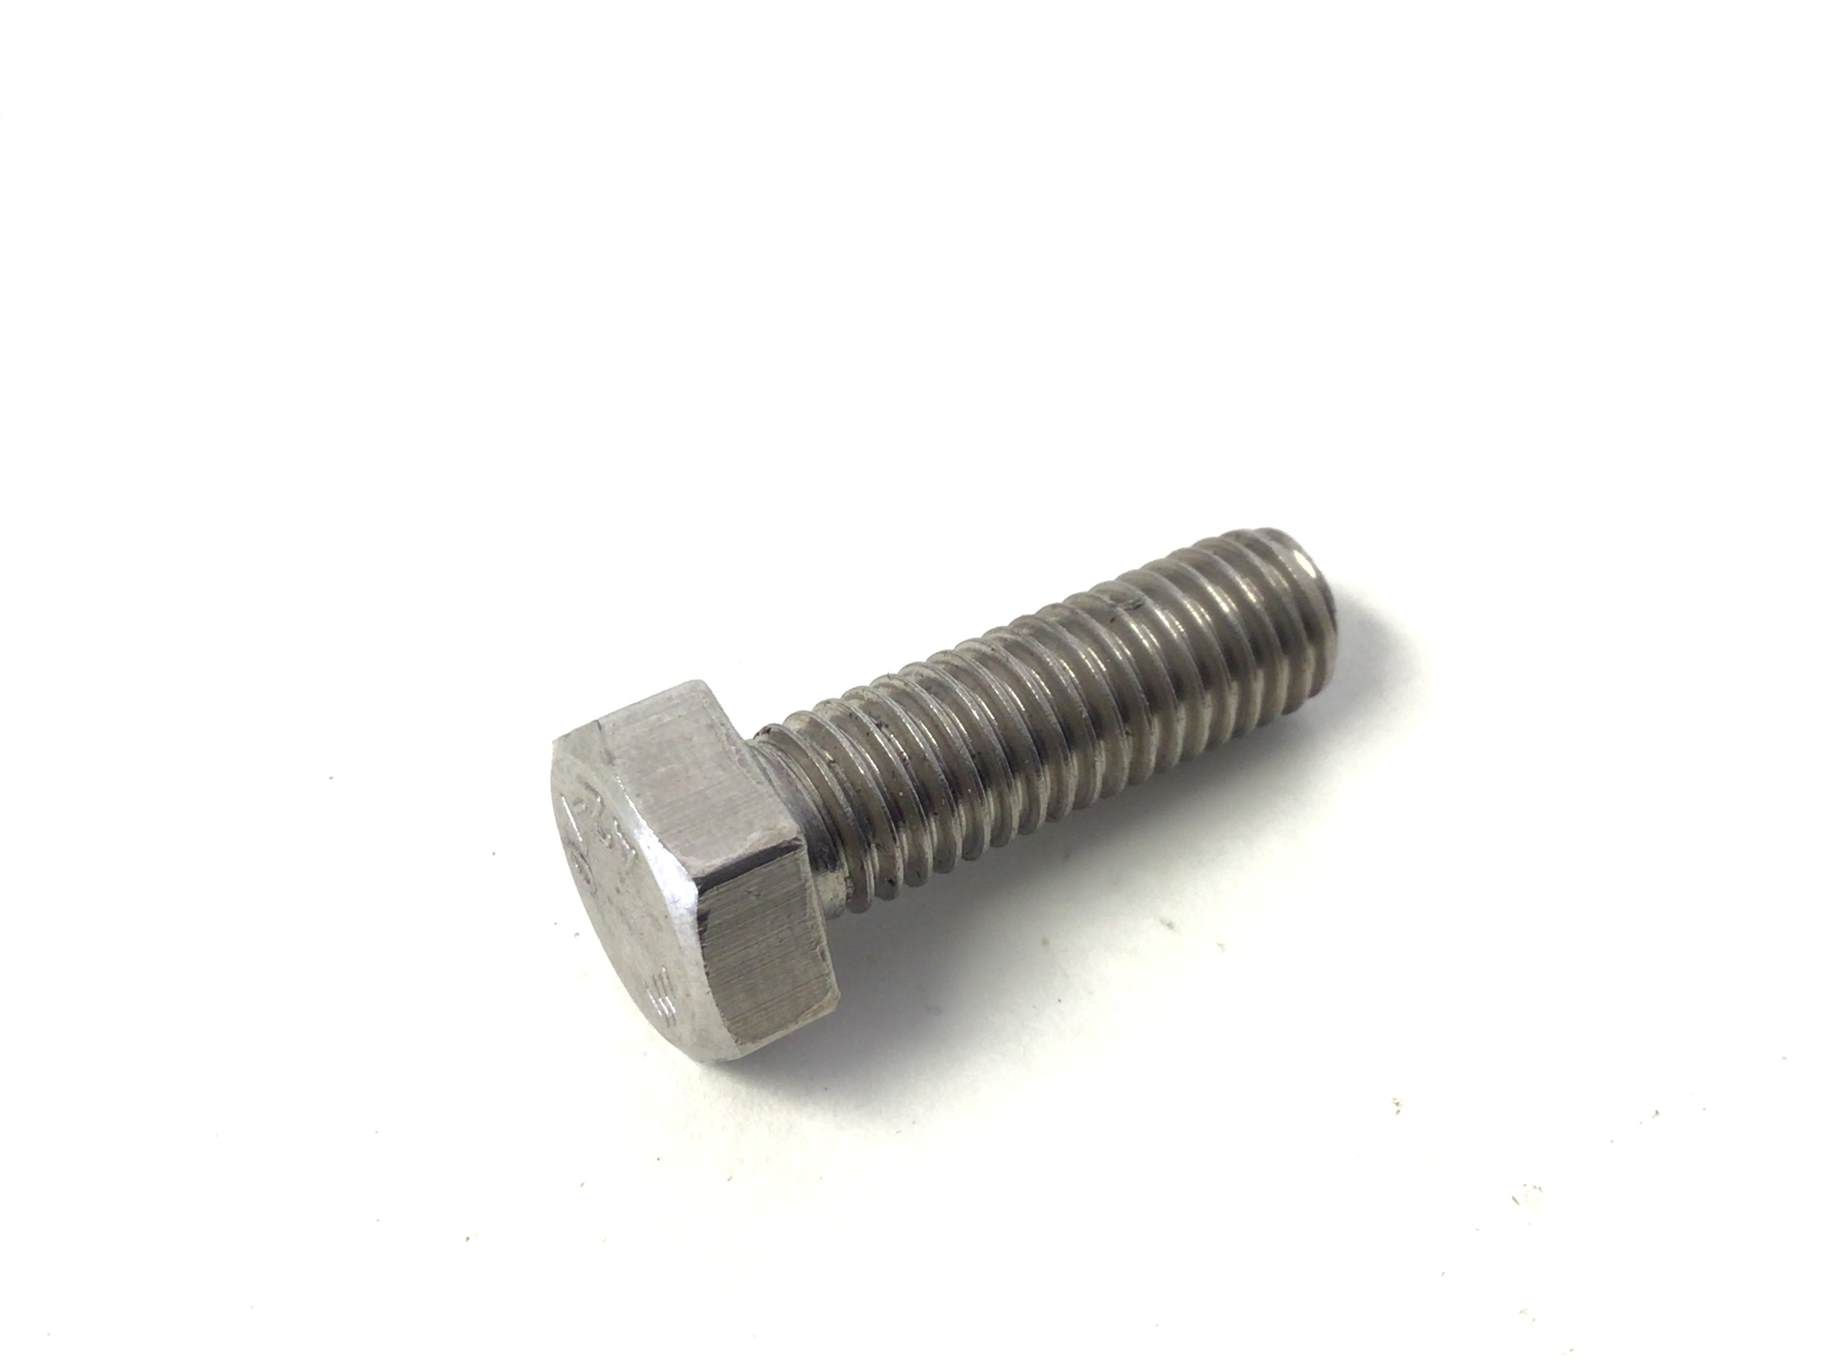 Hex Bolt Screw M8-1.25-25mm (Used)